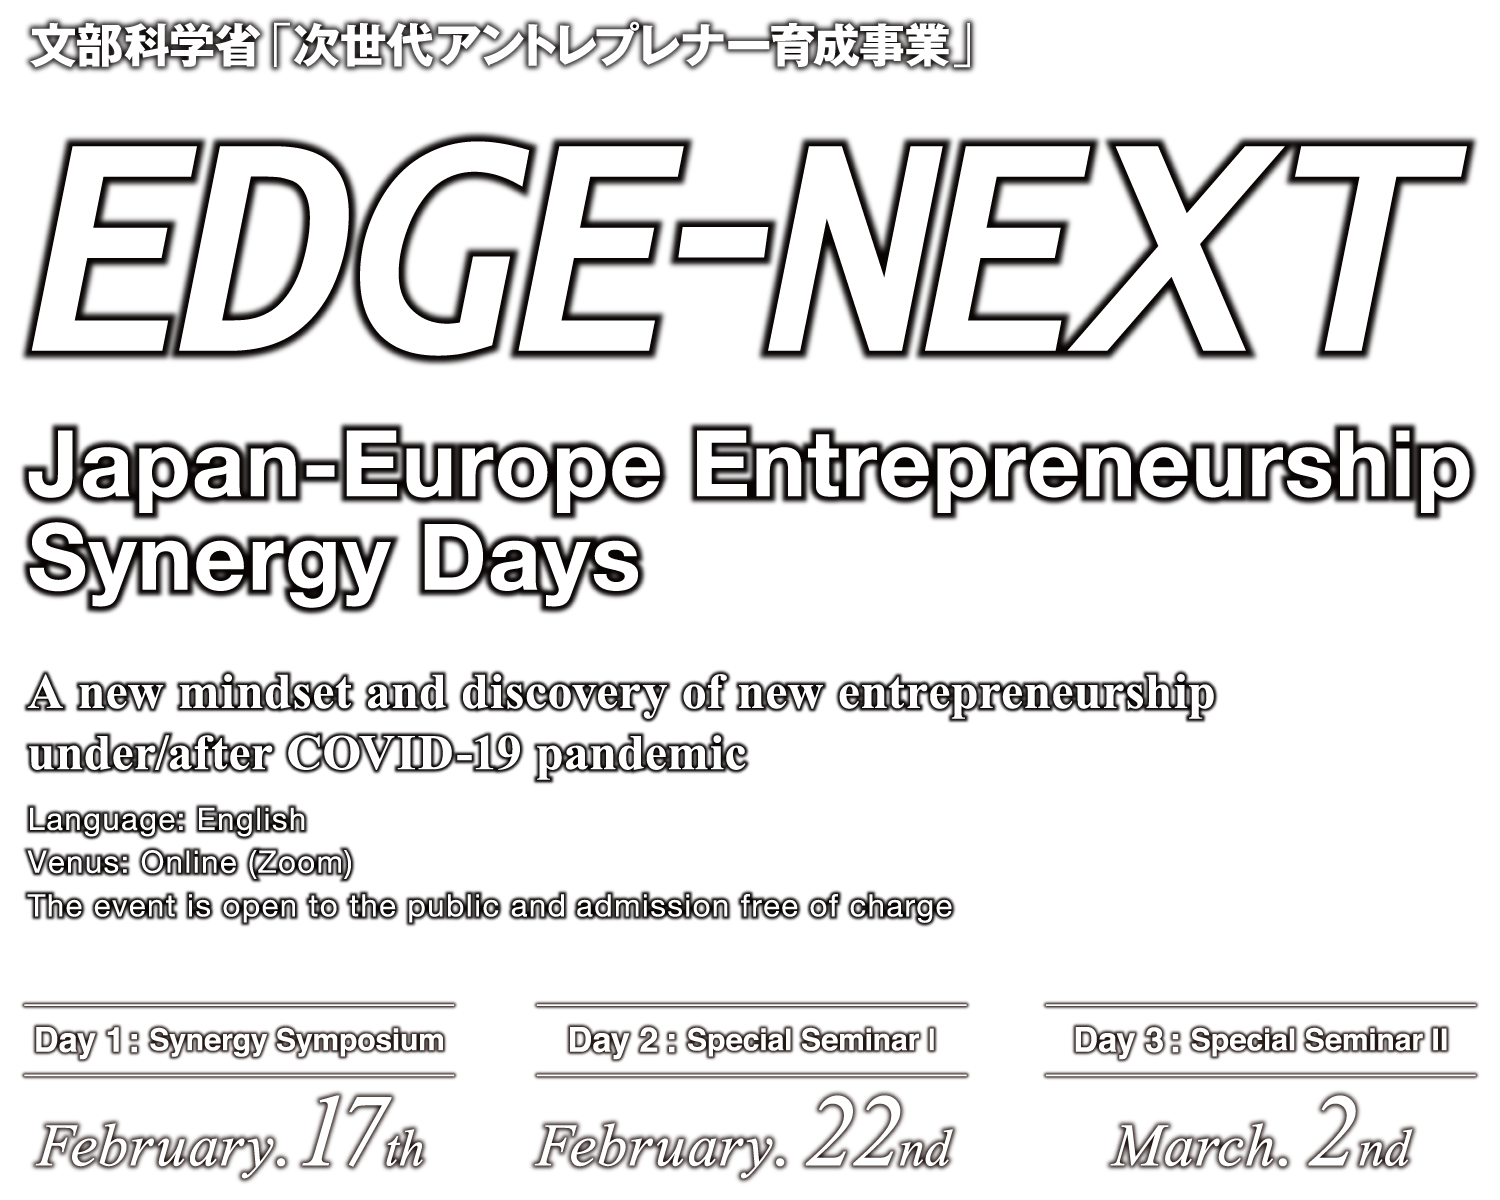 EDGE-NEXT Japan-Europe Entrepreneurship Synergy Days｜文部科学省「次世代アントレプレナー育成事業」 A new mindset and discovery of new entrepreneurship under/after COVID-19 pandemic Language: English The event is open to the public and admission free of charge Day 1: Synergy Symposium February. 17th Day 2: Special Seminar I February. 22nd Day 3: Special Seminar II March. 2nd